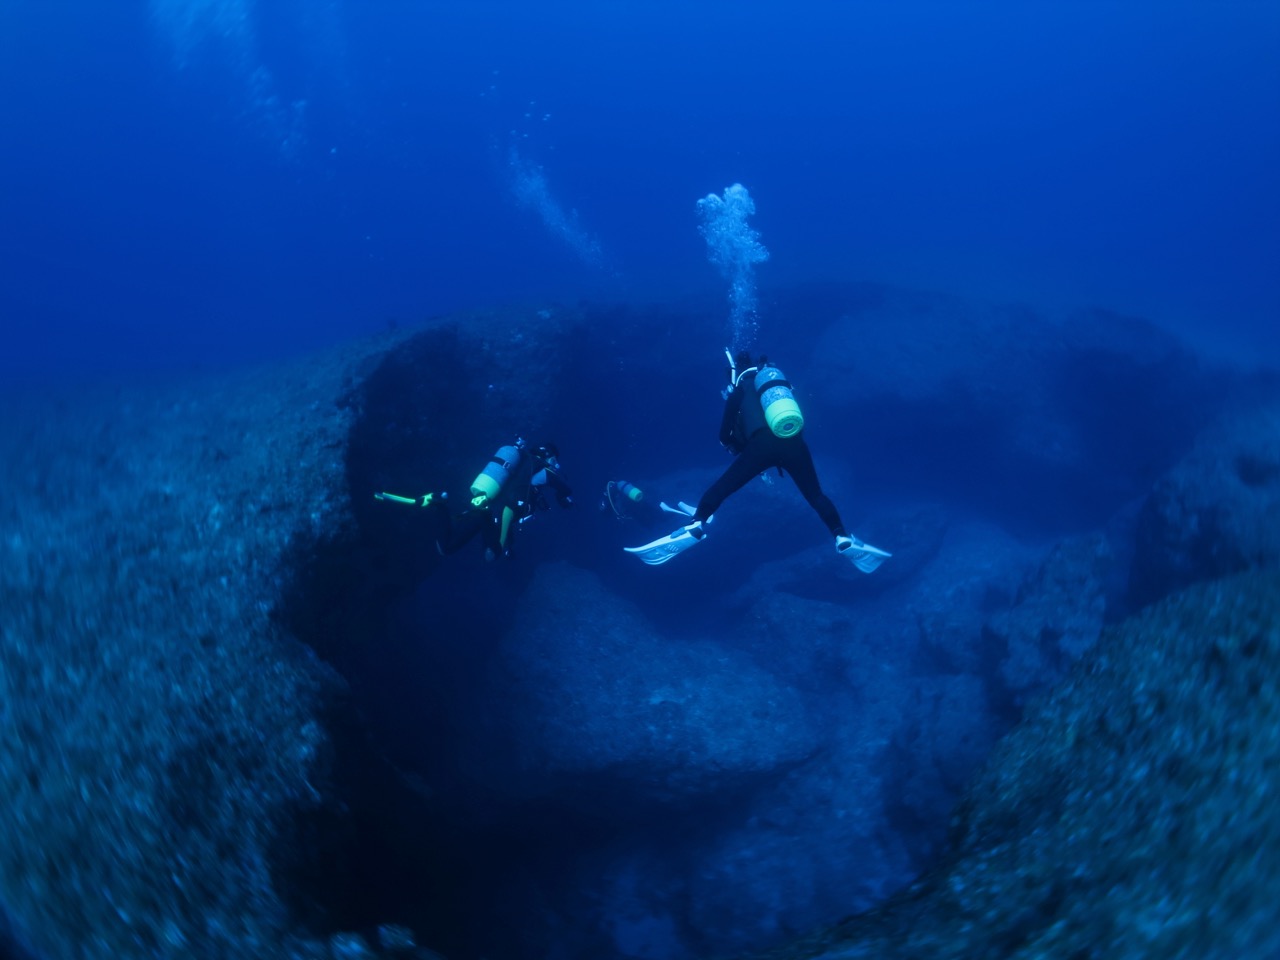 Two divers with deep diver certification